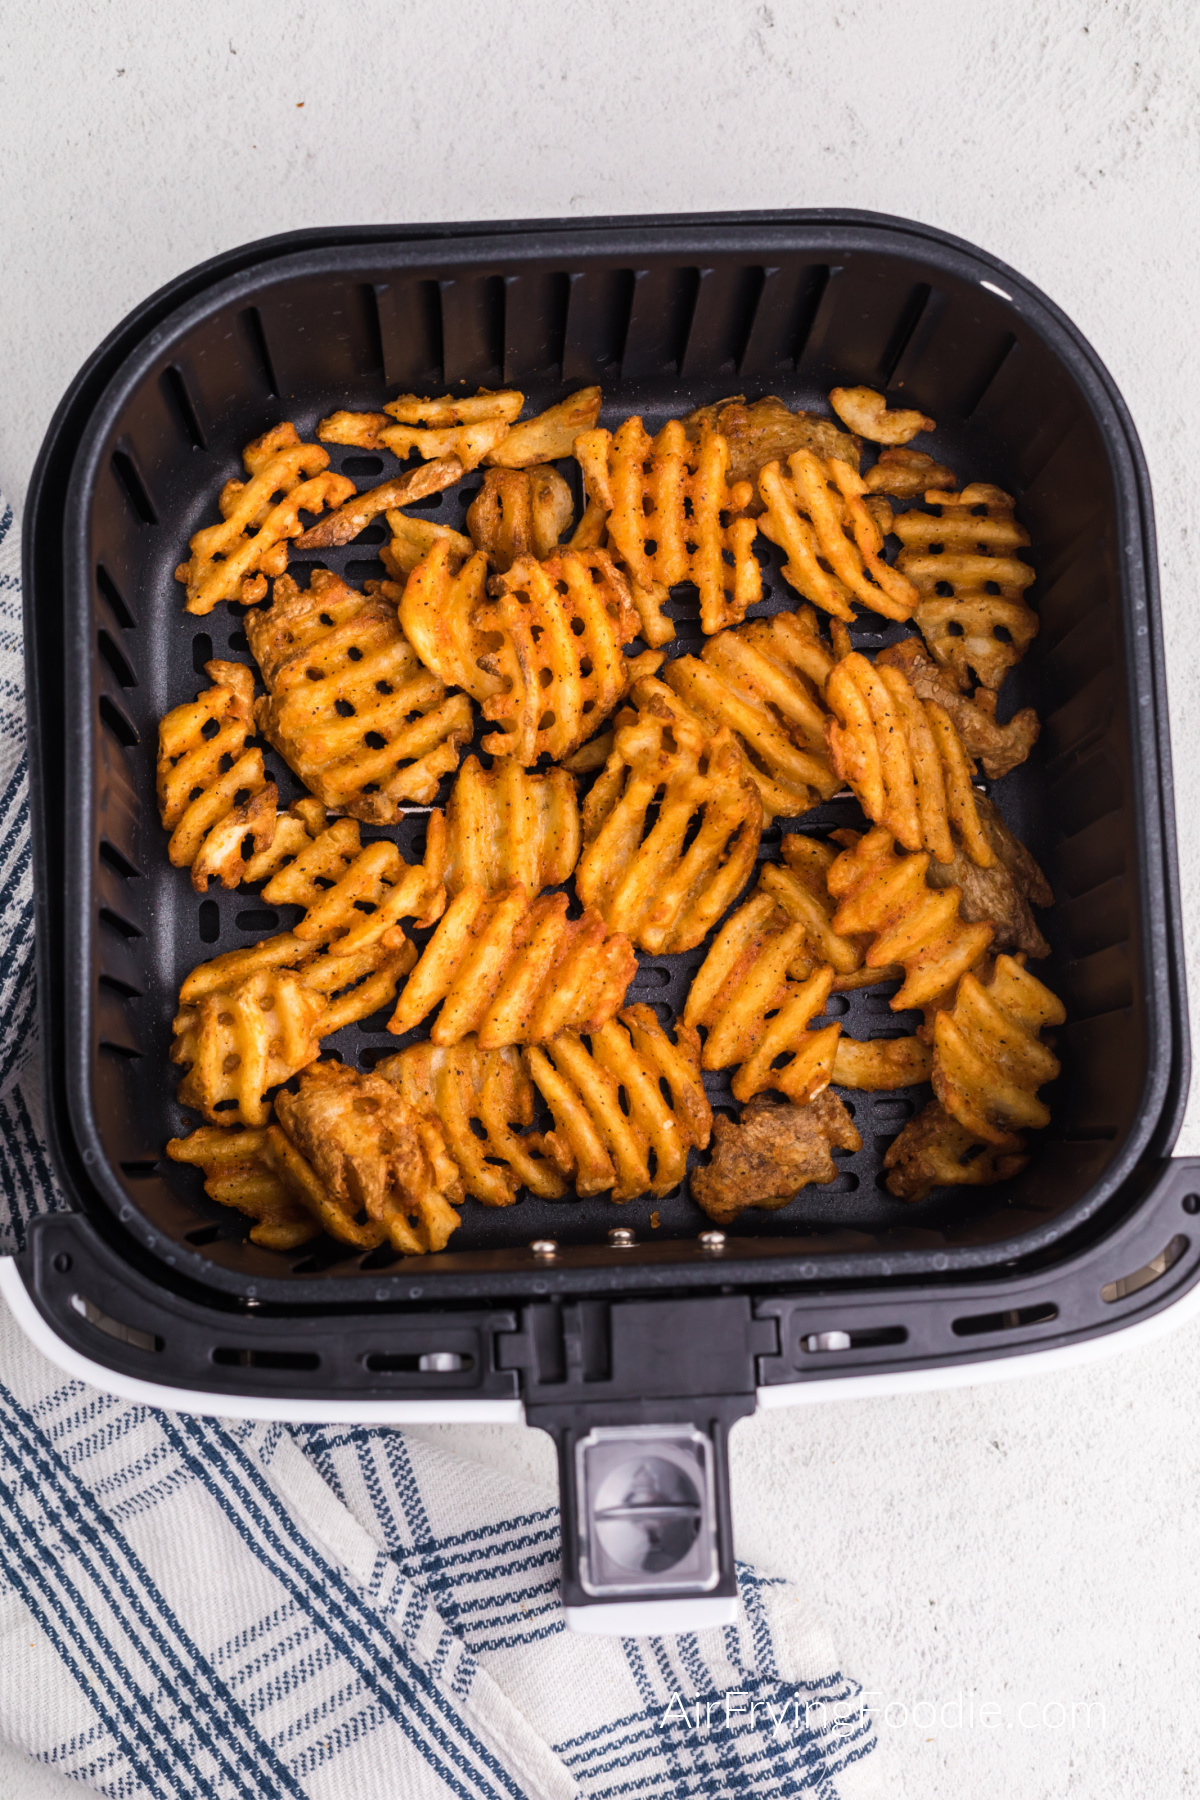 Air fried frozen waffle fries in the basket of the air fryer, ready to serve.